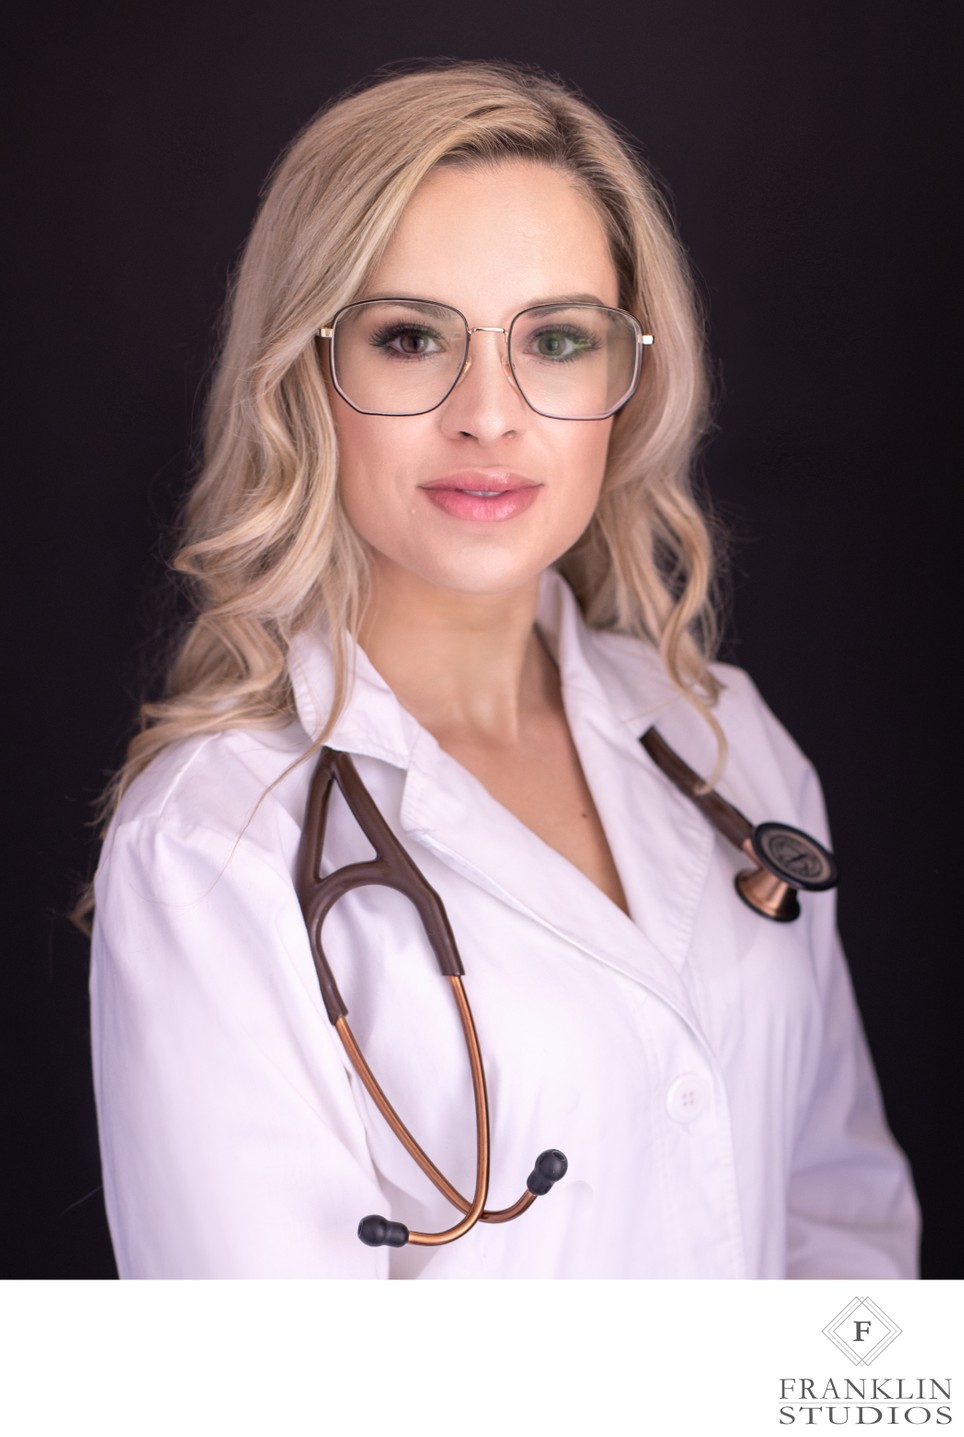 Headshots for Healthcare Professionals